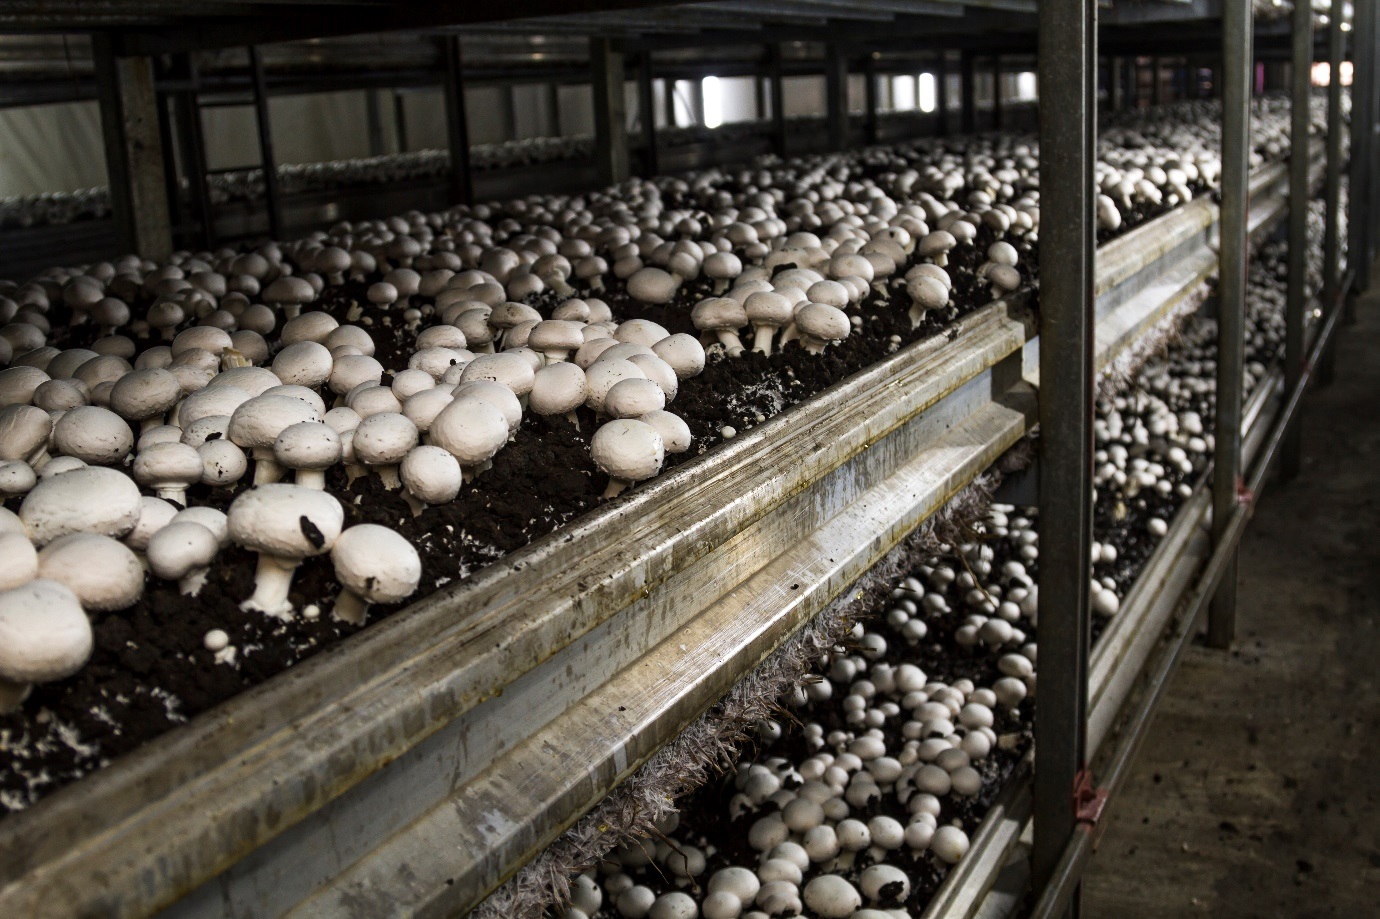 Case Study- Food picking and packing scale for Australia’s largest Mushroom Growers